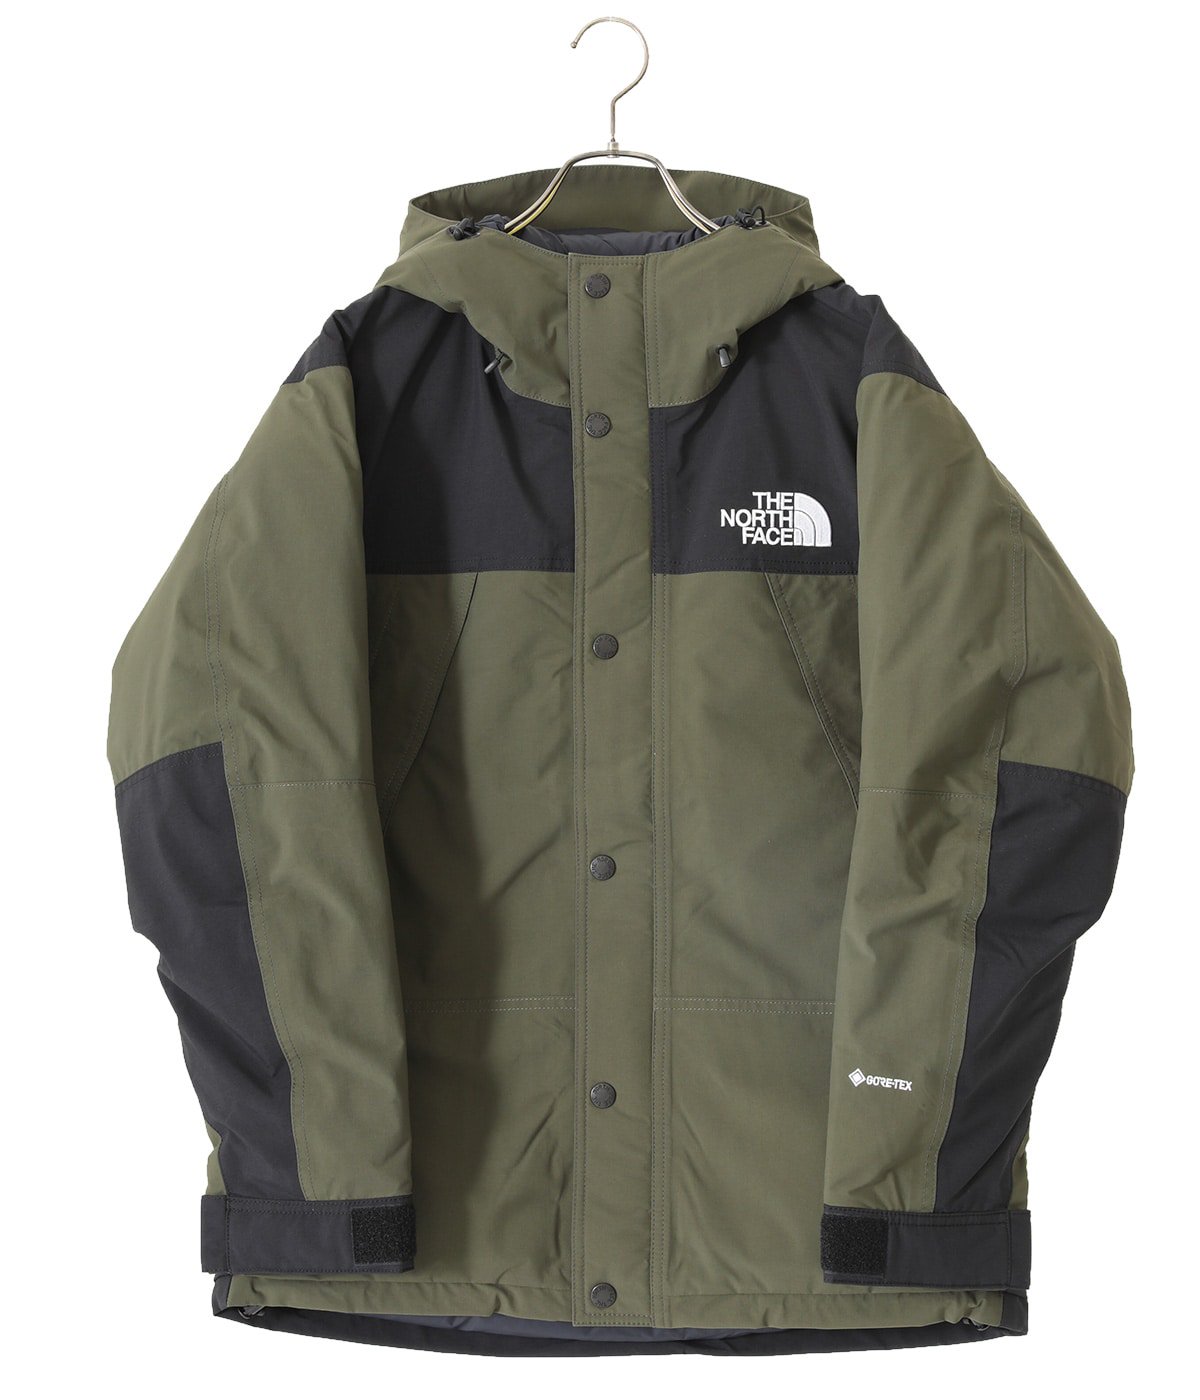 Mountain Down Jacket | THE NORTH FACE(ザ ノースフェイス 